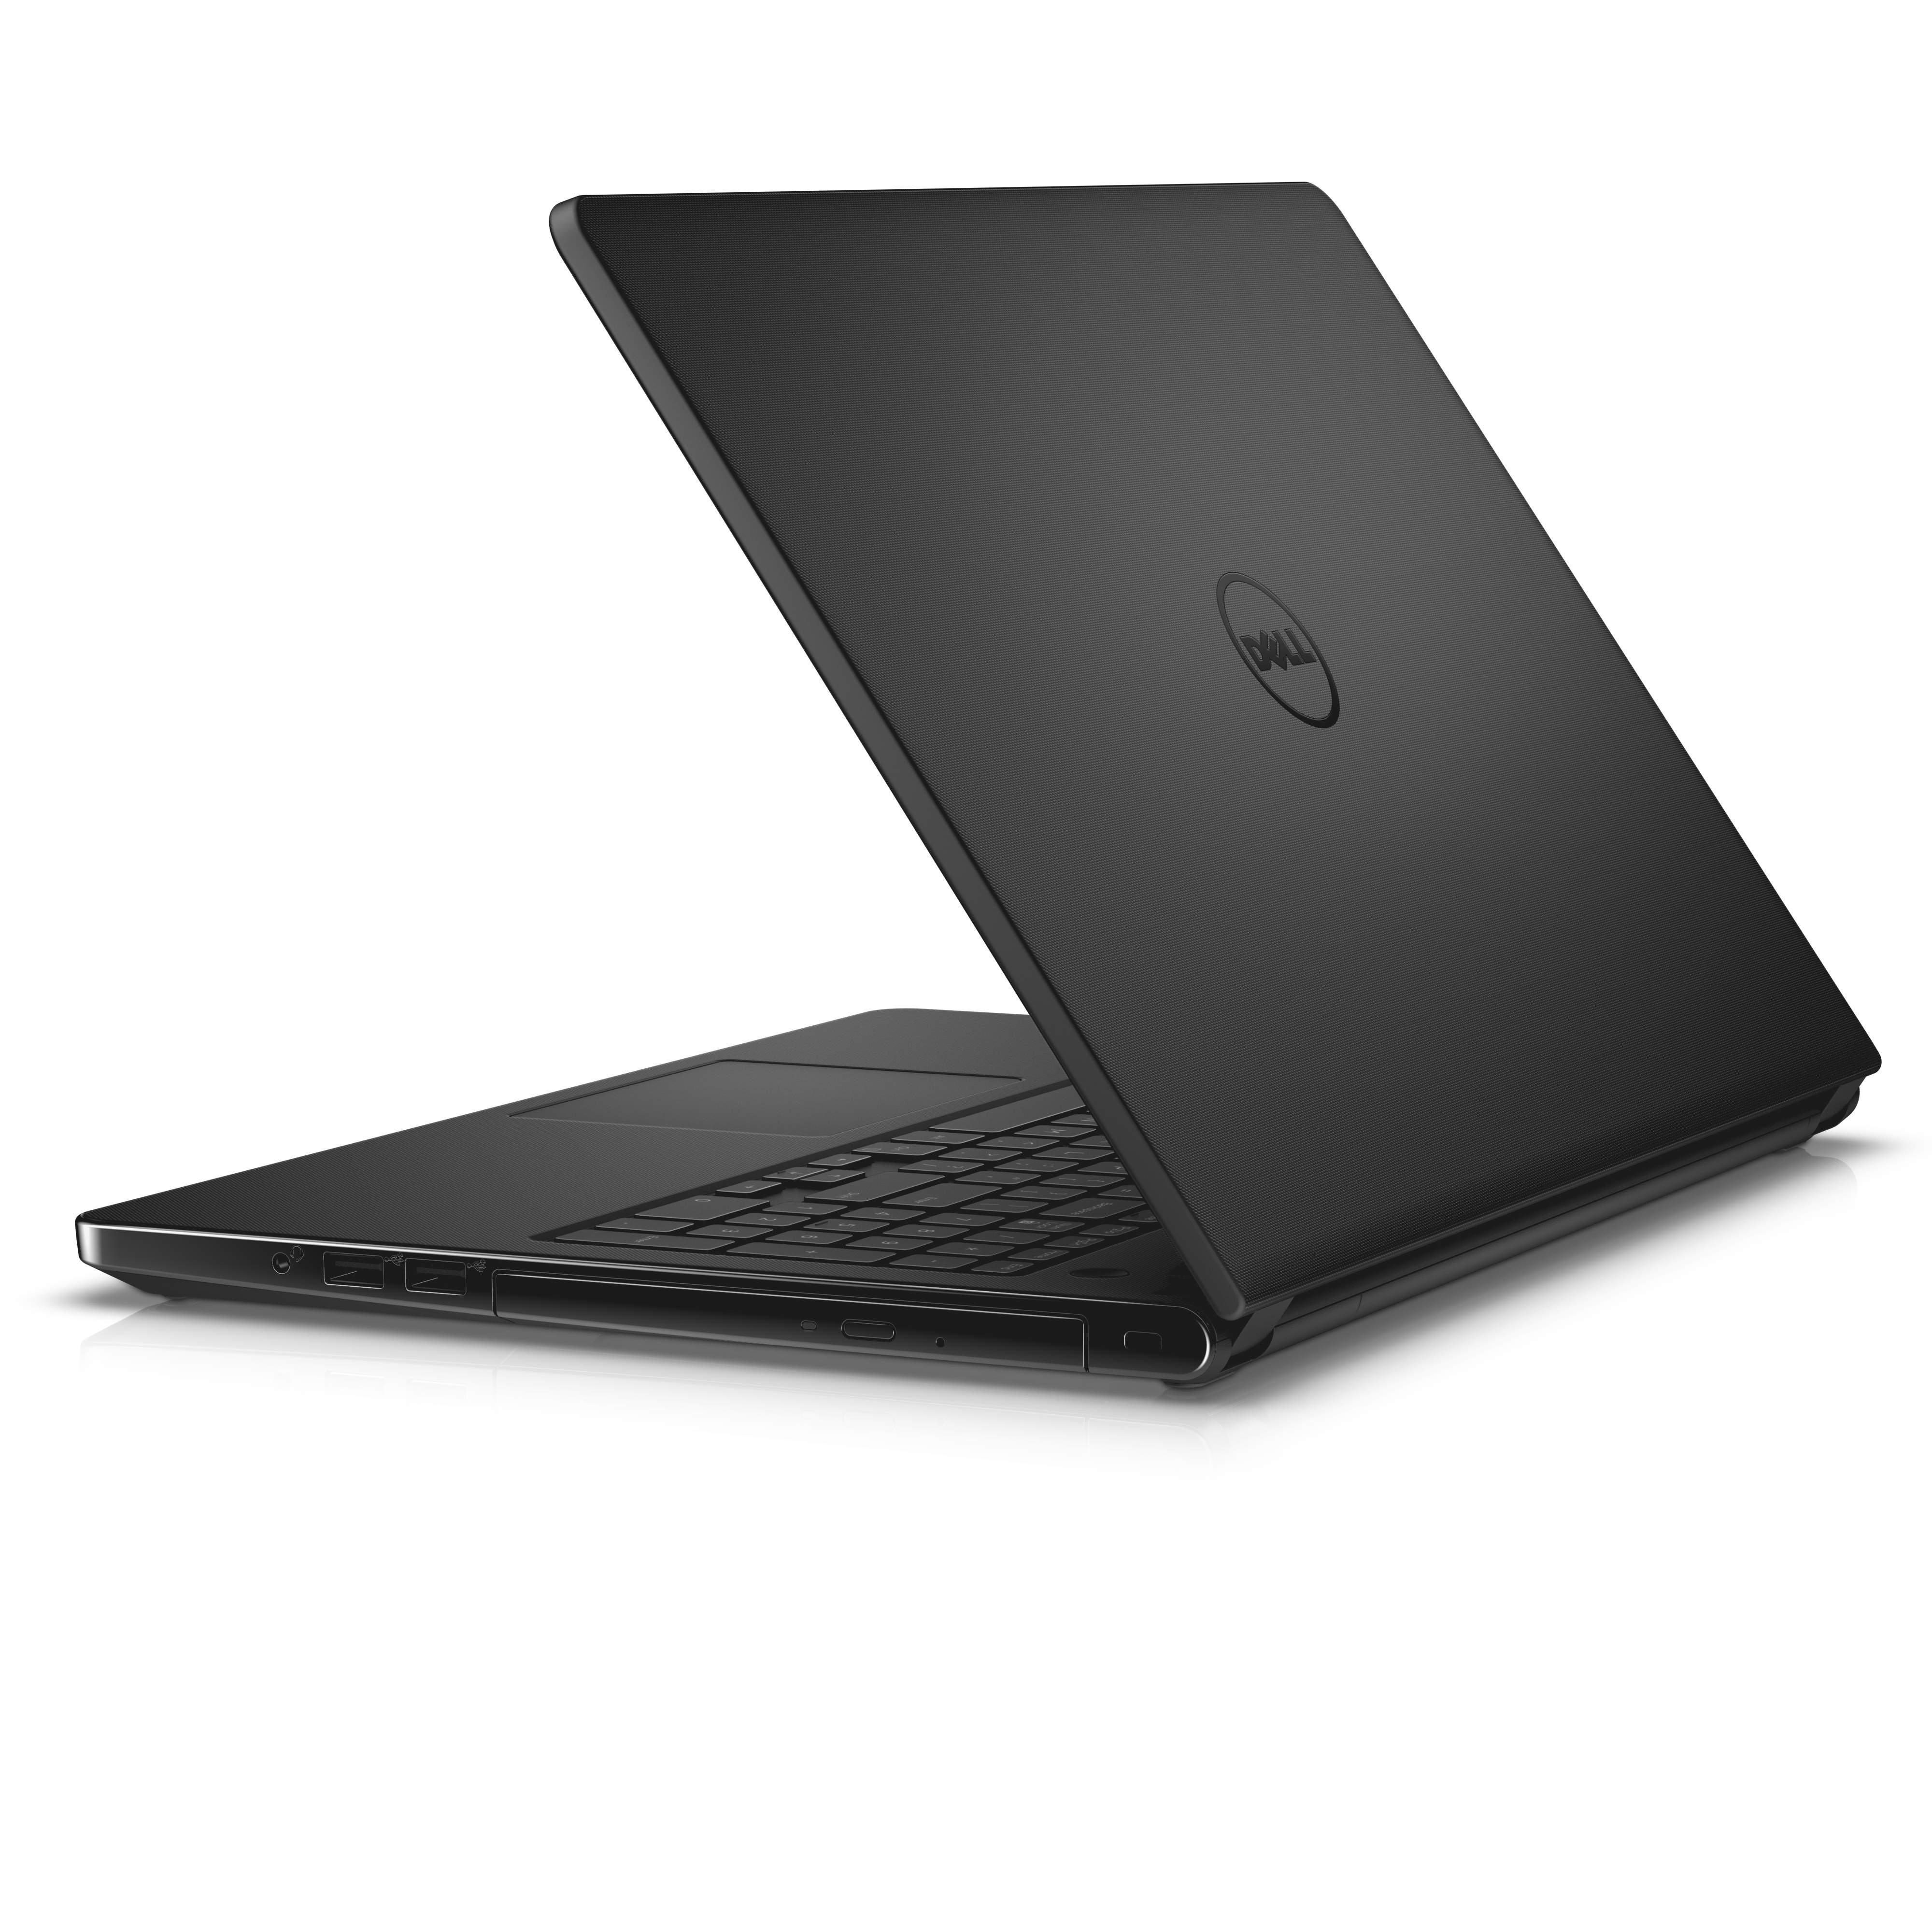 New Dell Inspiron Laptops 2 In 1 And Desktop Devices Offer Purposeful Innovation And Outstanding Value For Everyday Computing Needs Business Wire